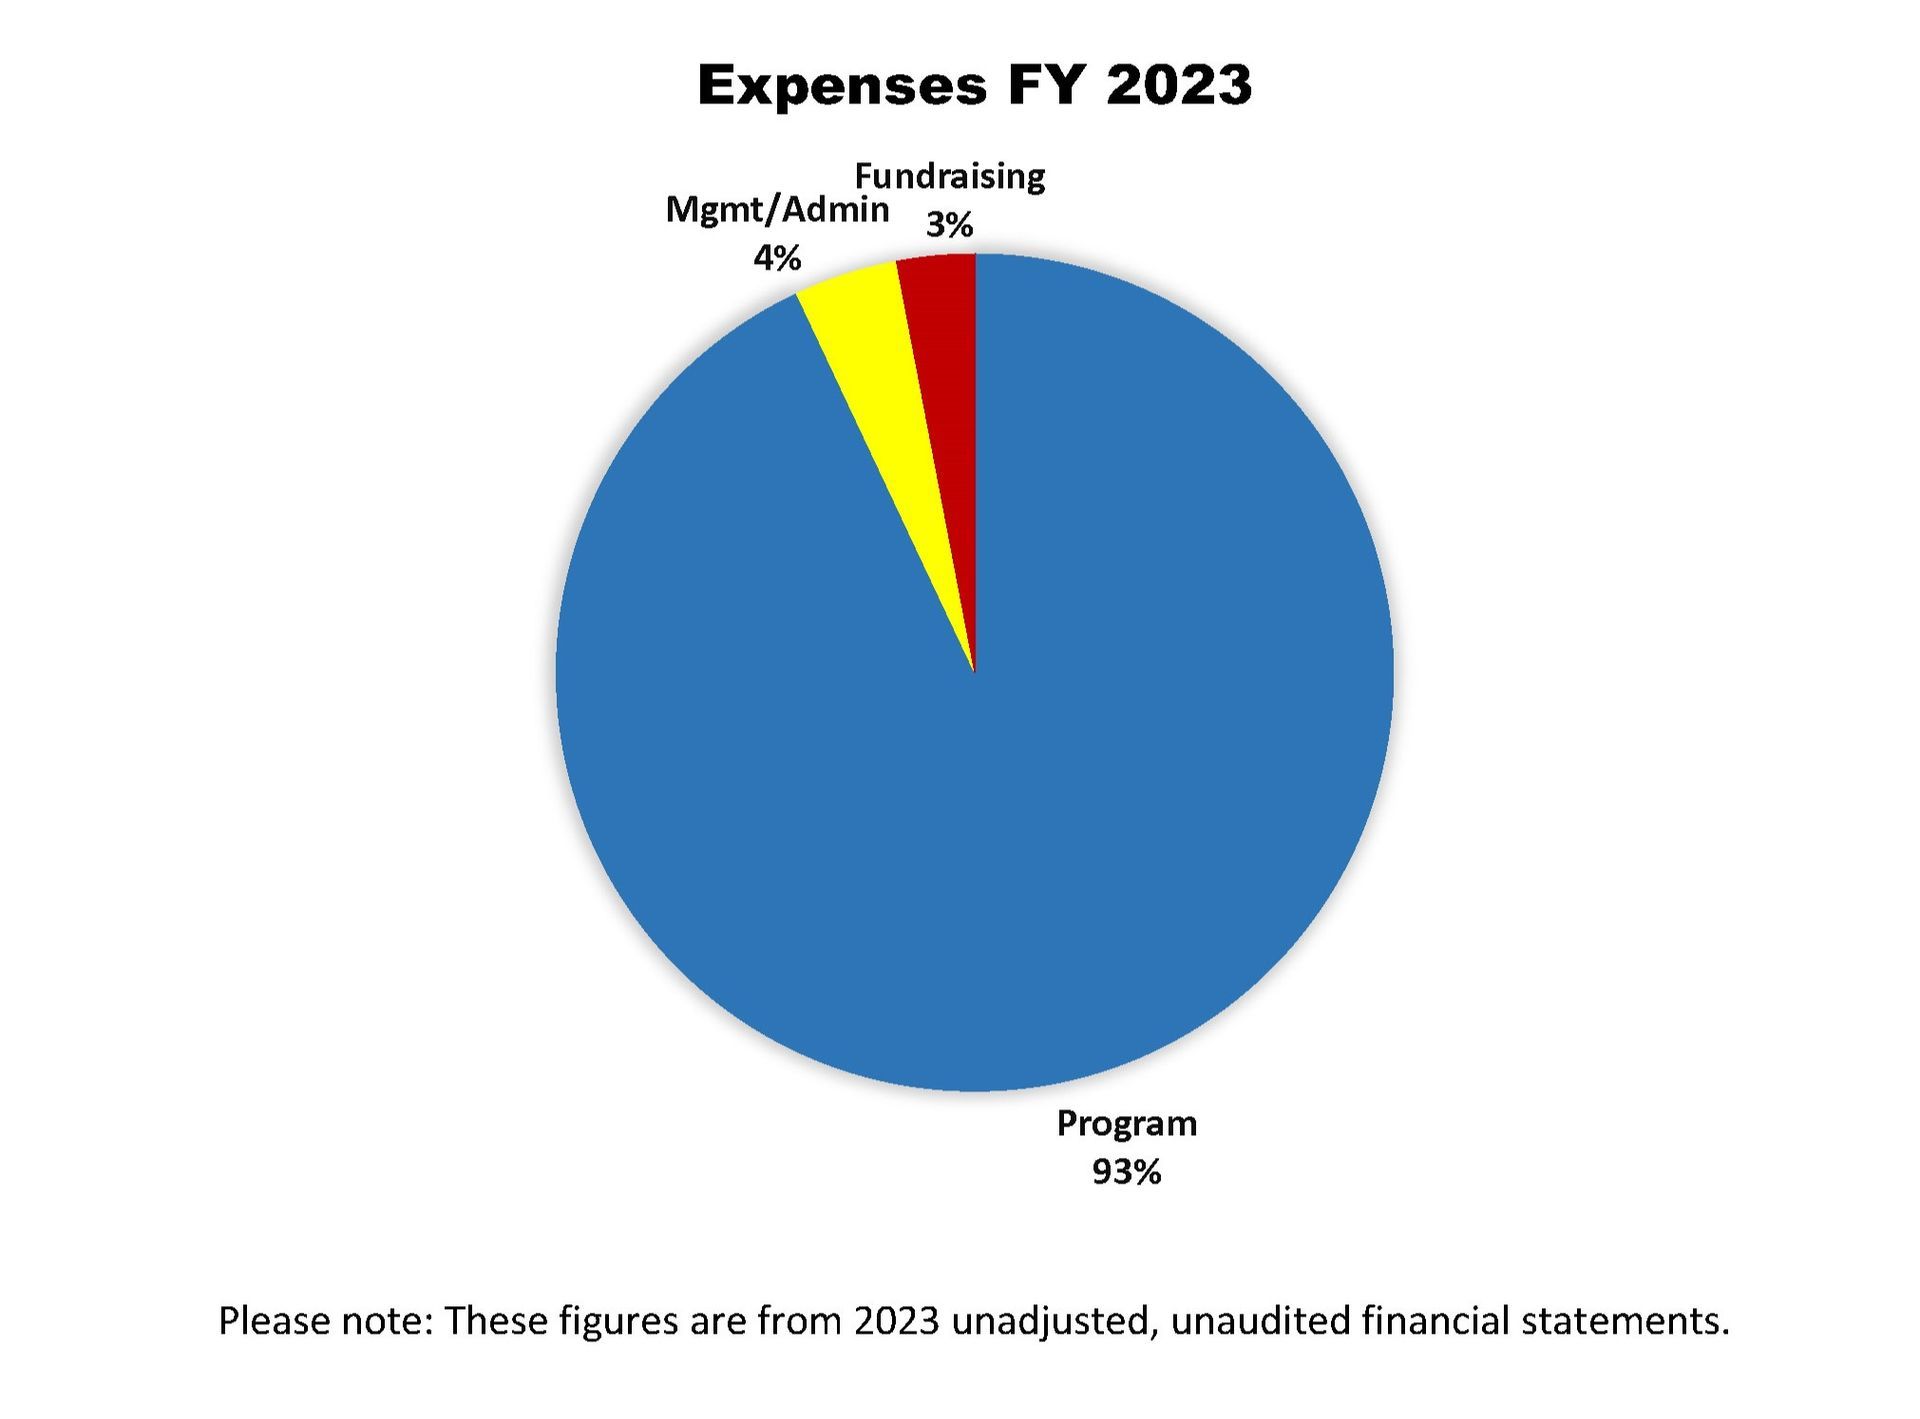 CROS Ministries FY 2021Expenses